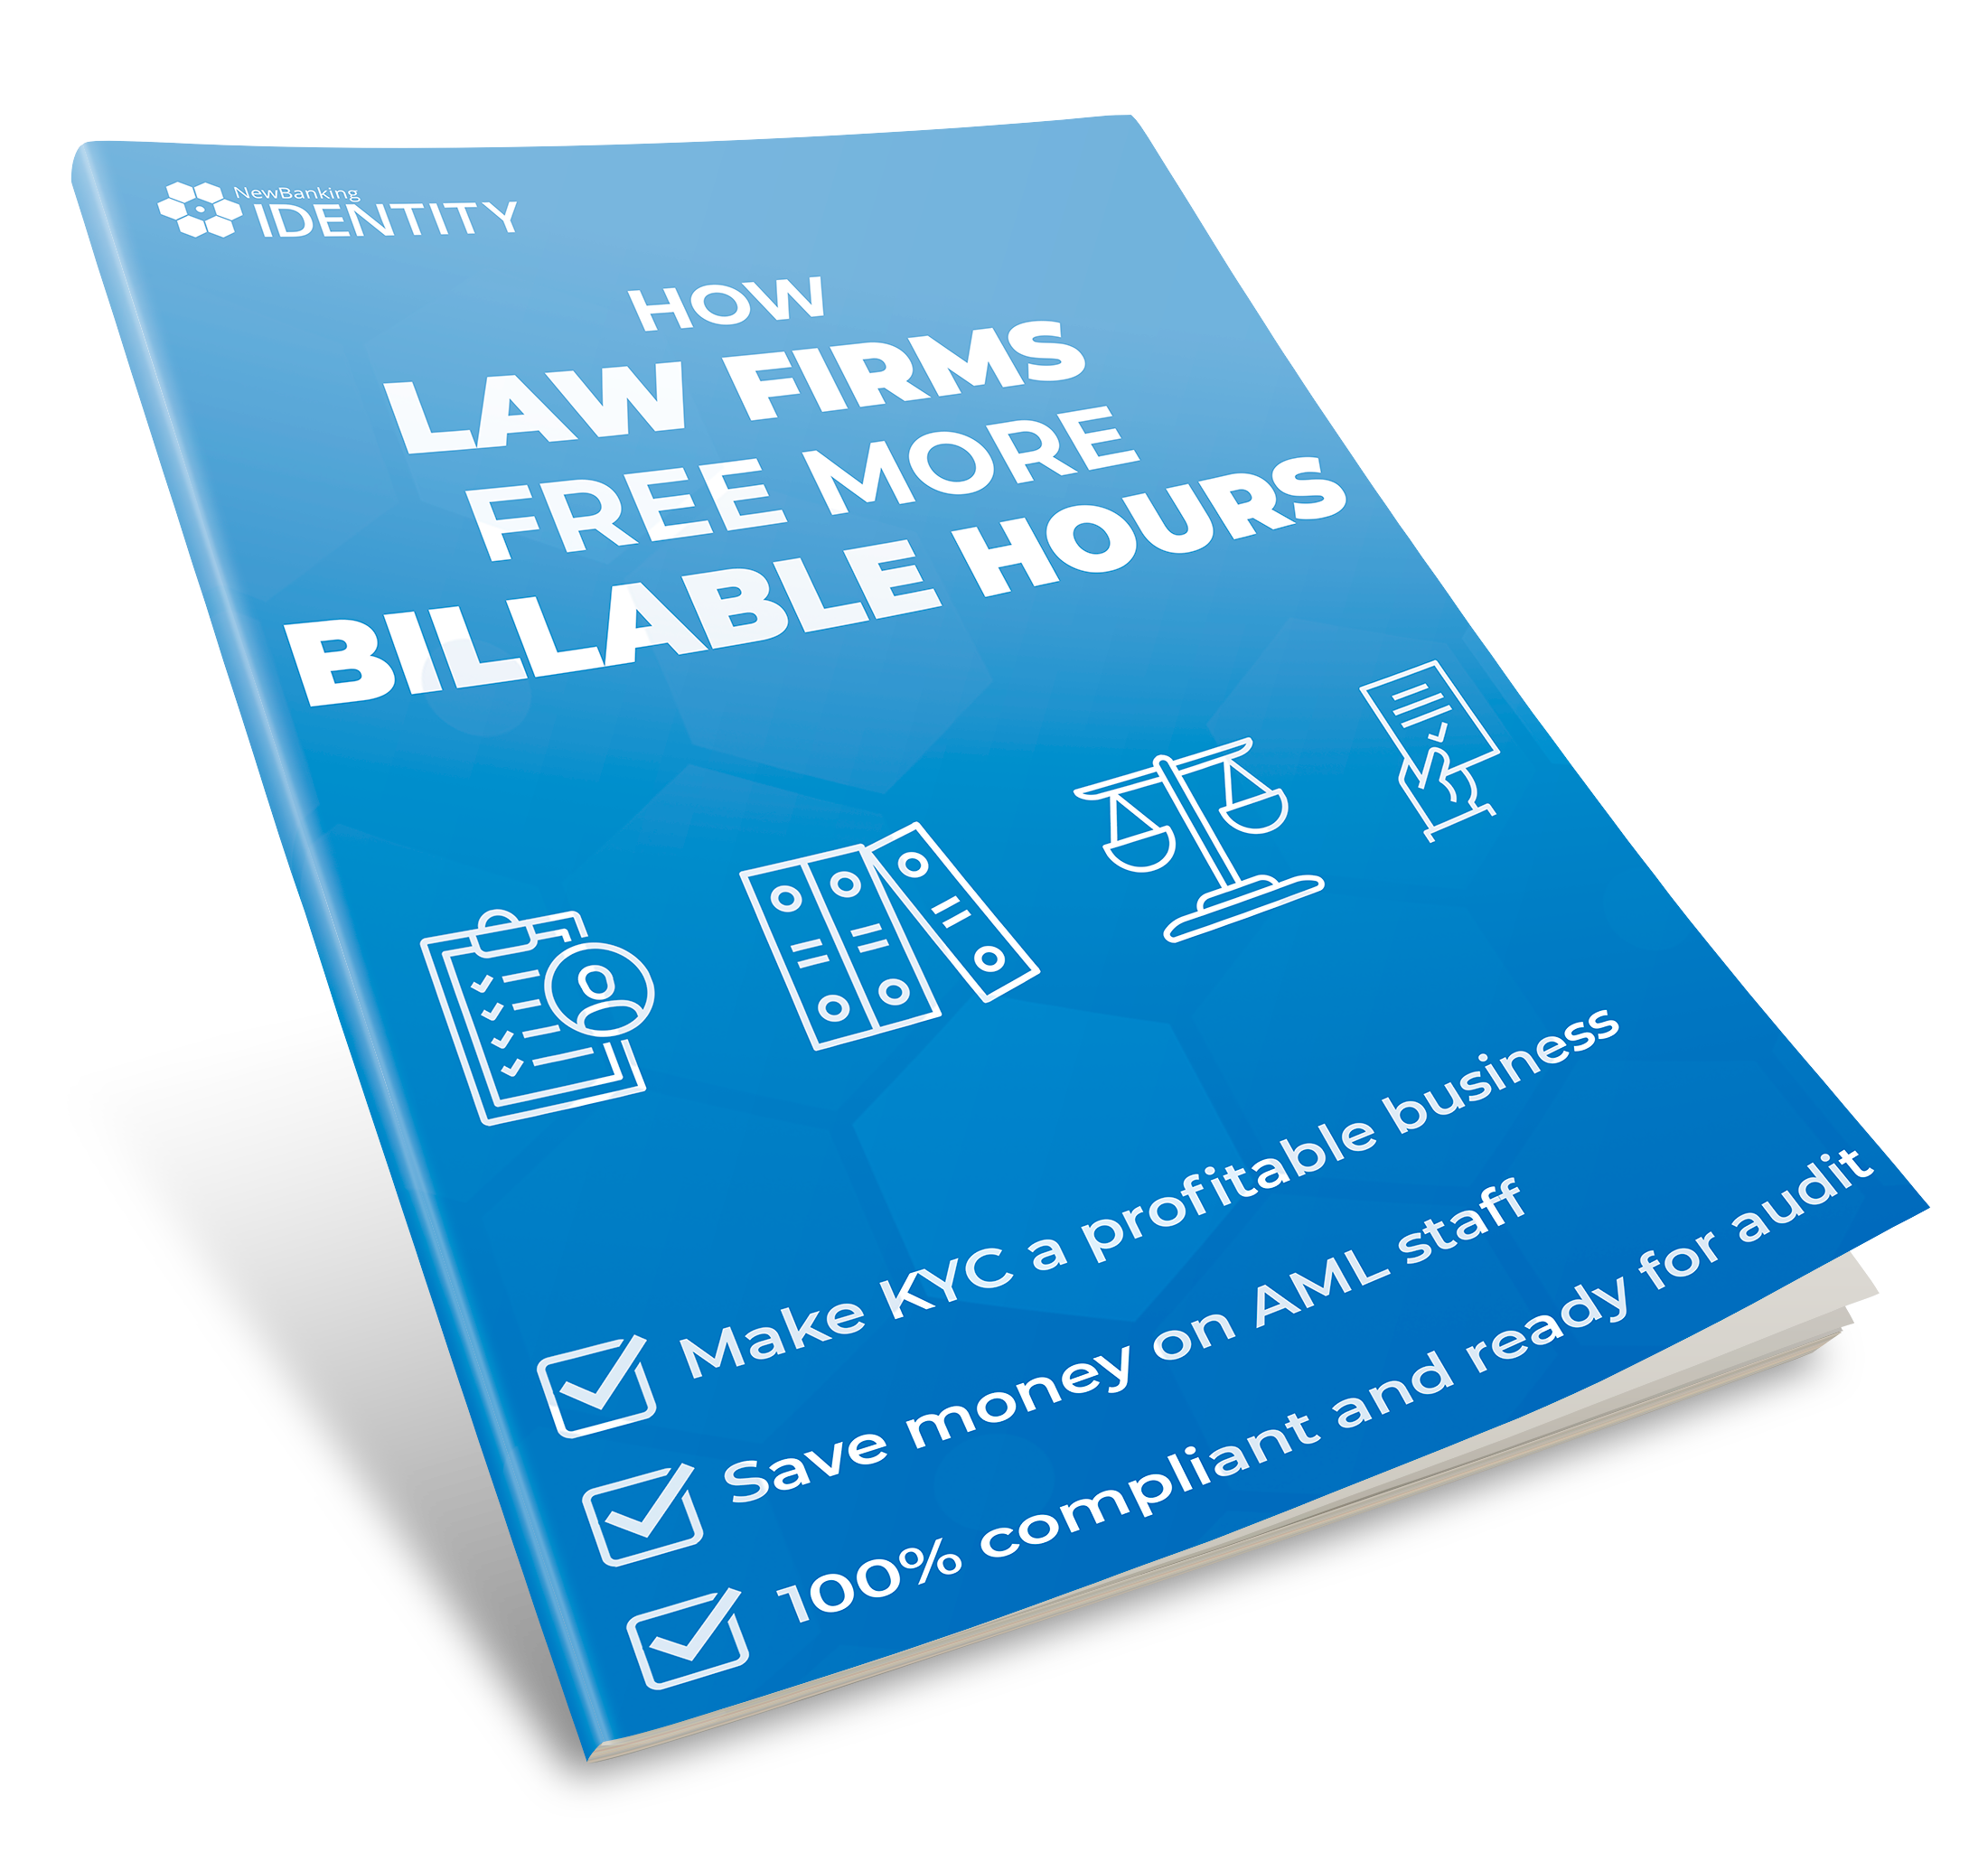 Cover - How Law Firms Free More Billable Hours - Newbanking